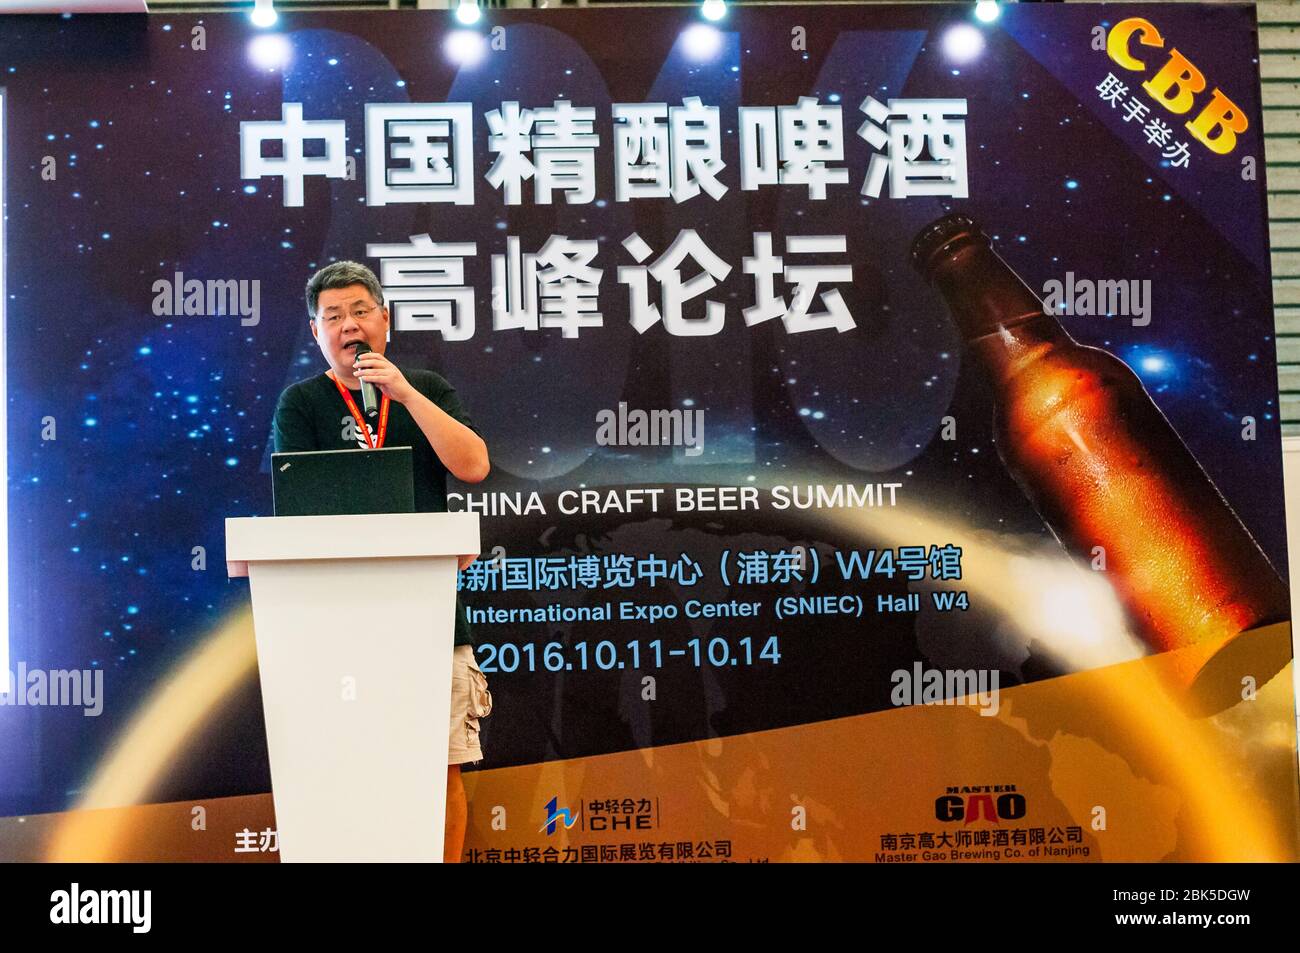 Nanjing based Master Gao Brewery's owner and founder Gao Yan speaking at the 2016 China Craft Beer Summit in Shanghai Stock Photo